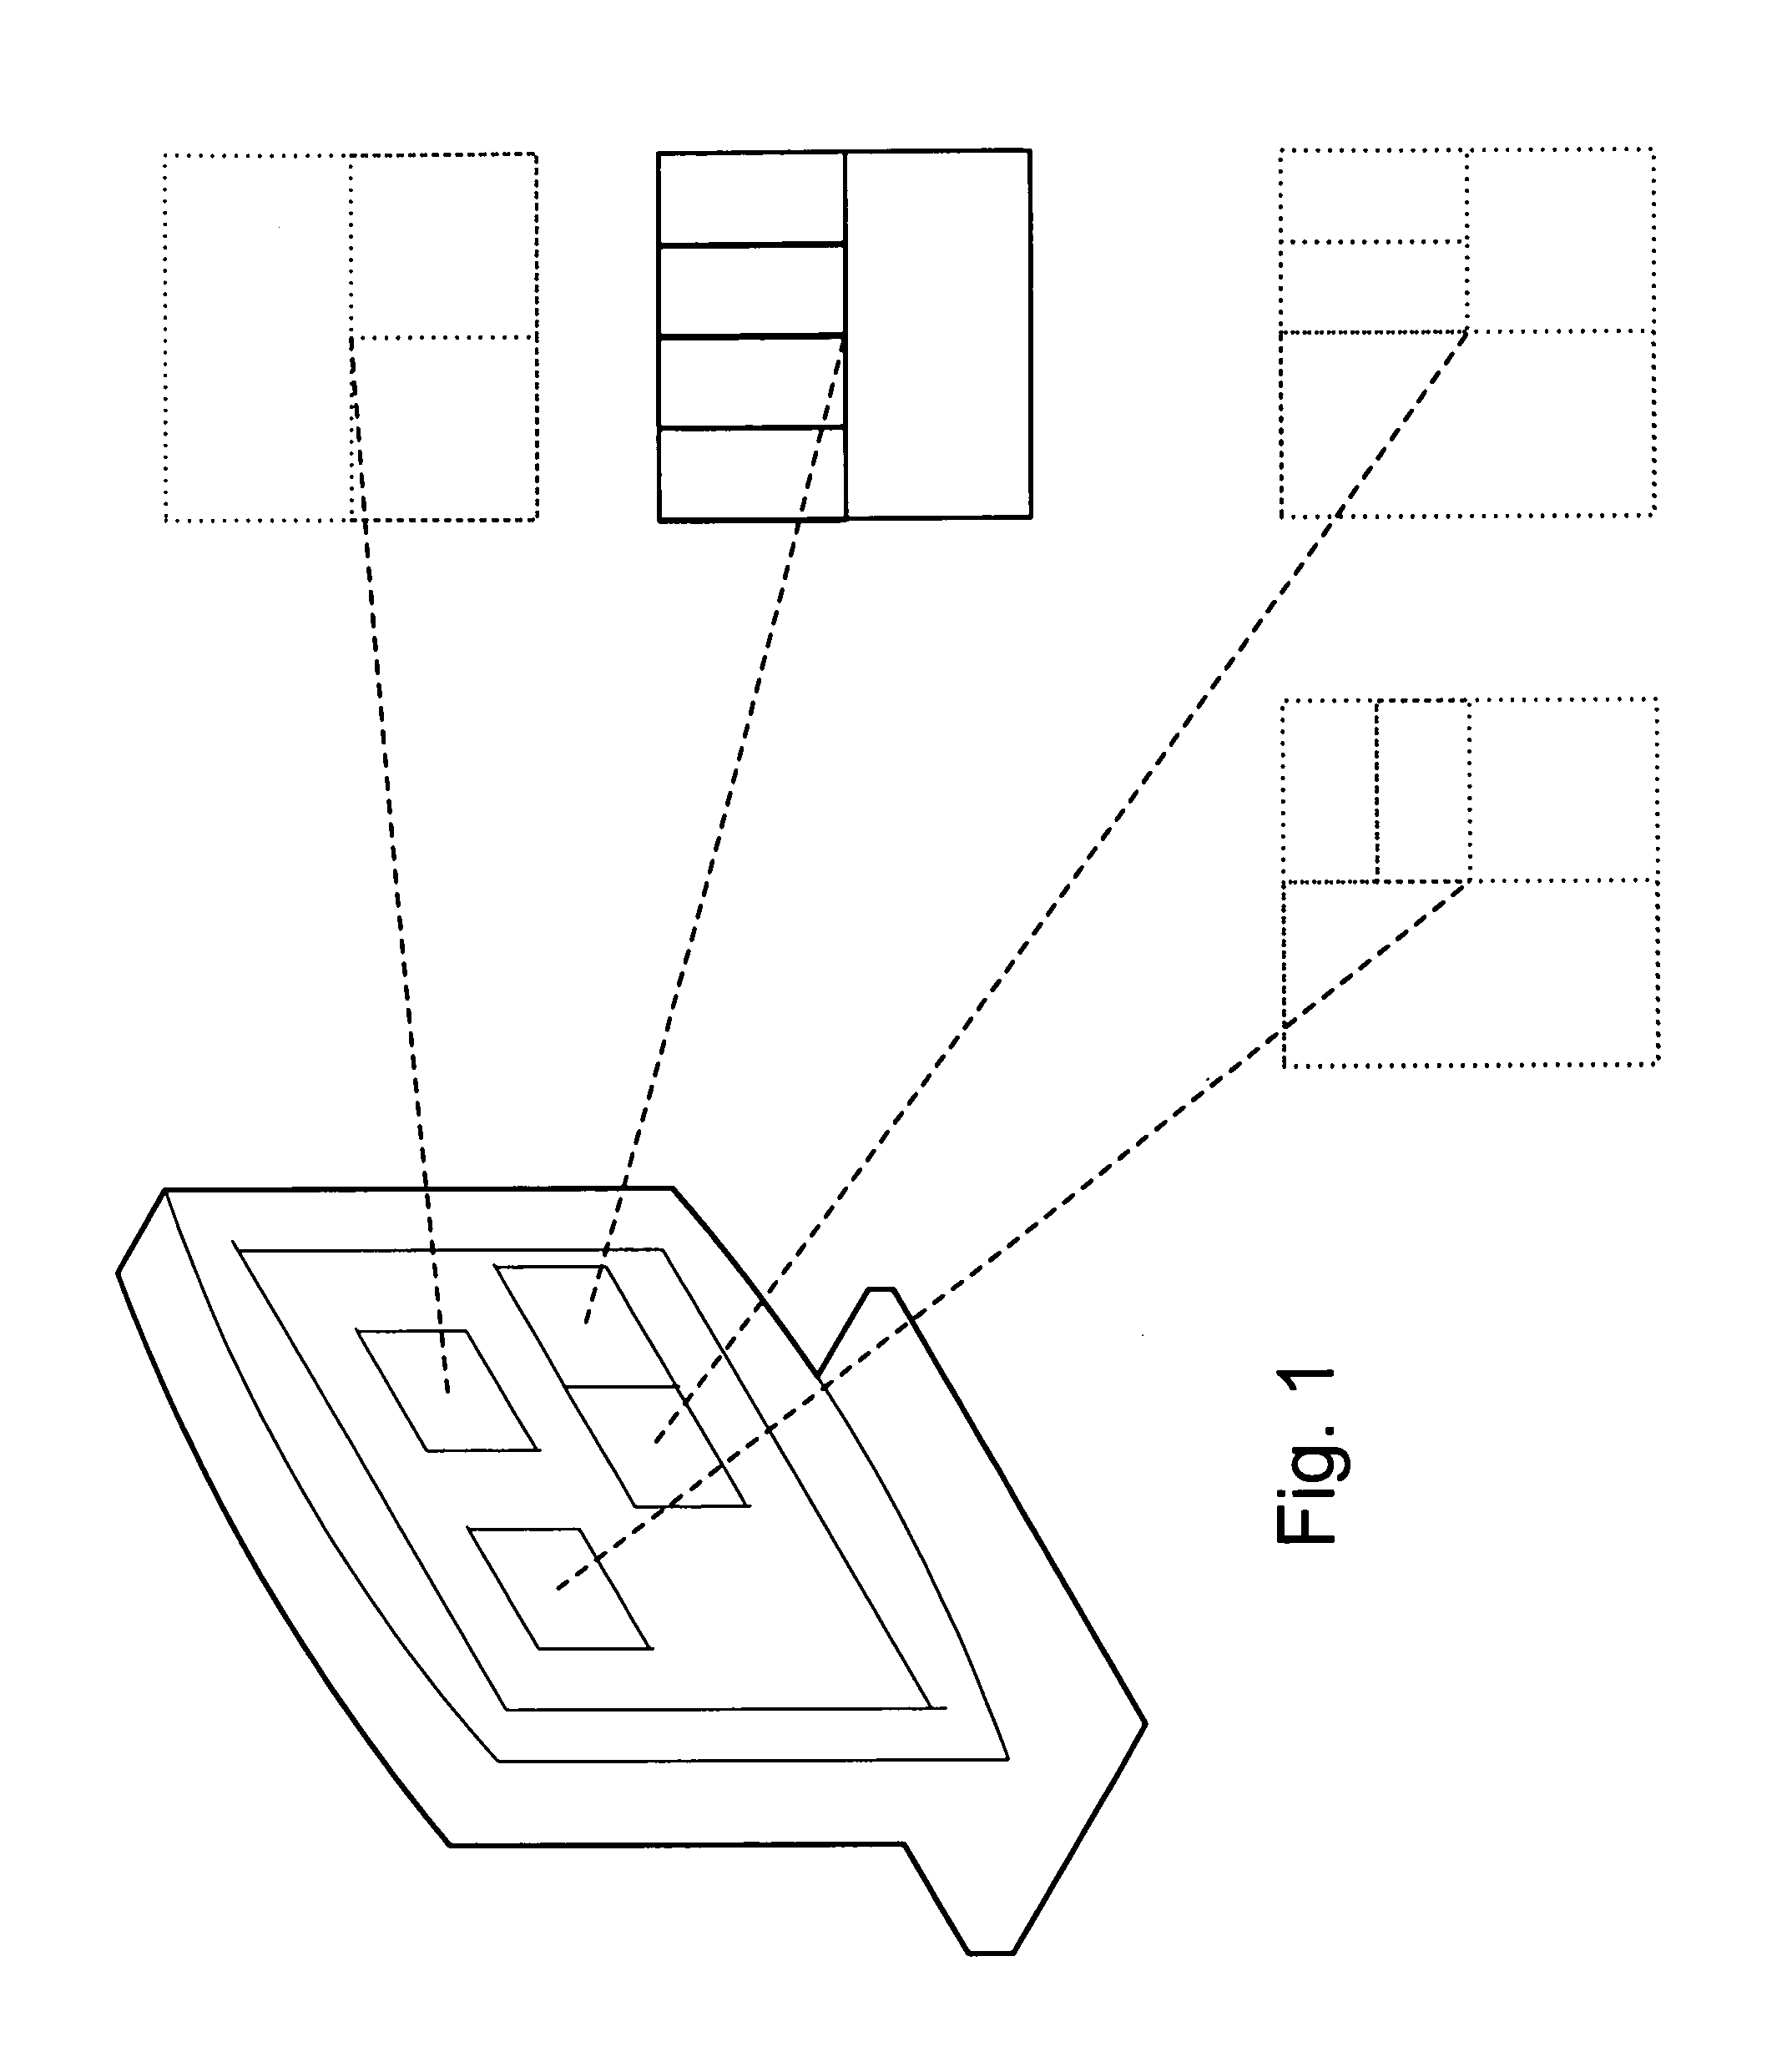 Multiple shell multi faceted graphical user interface